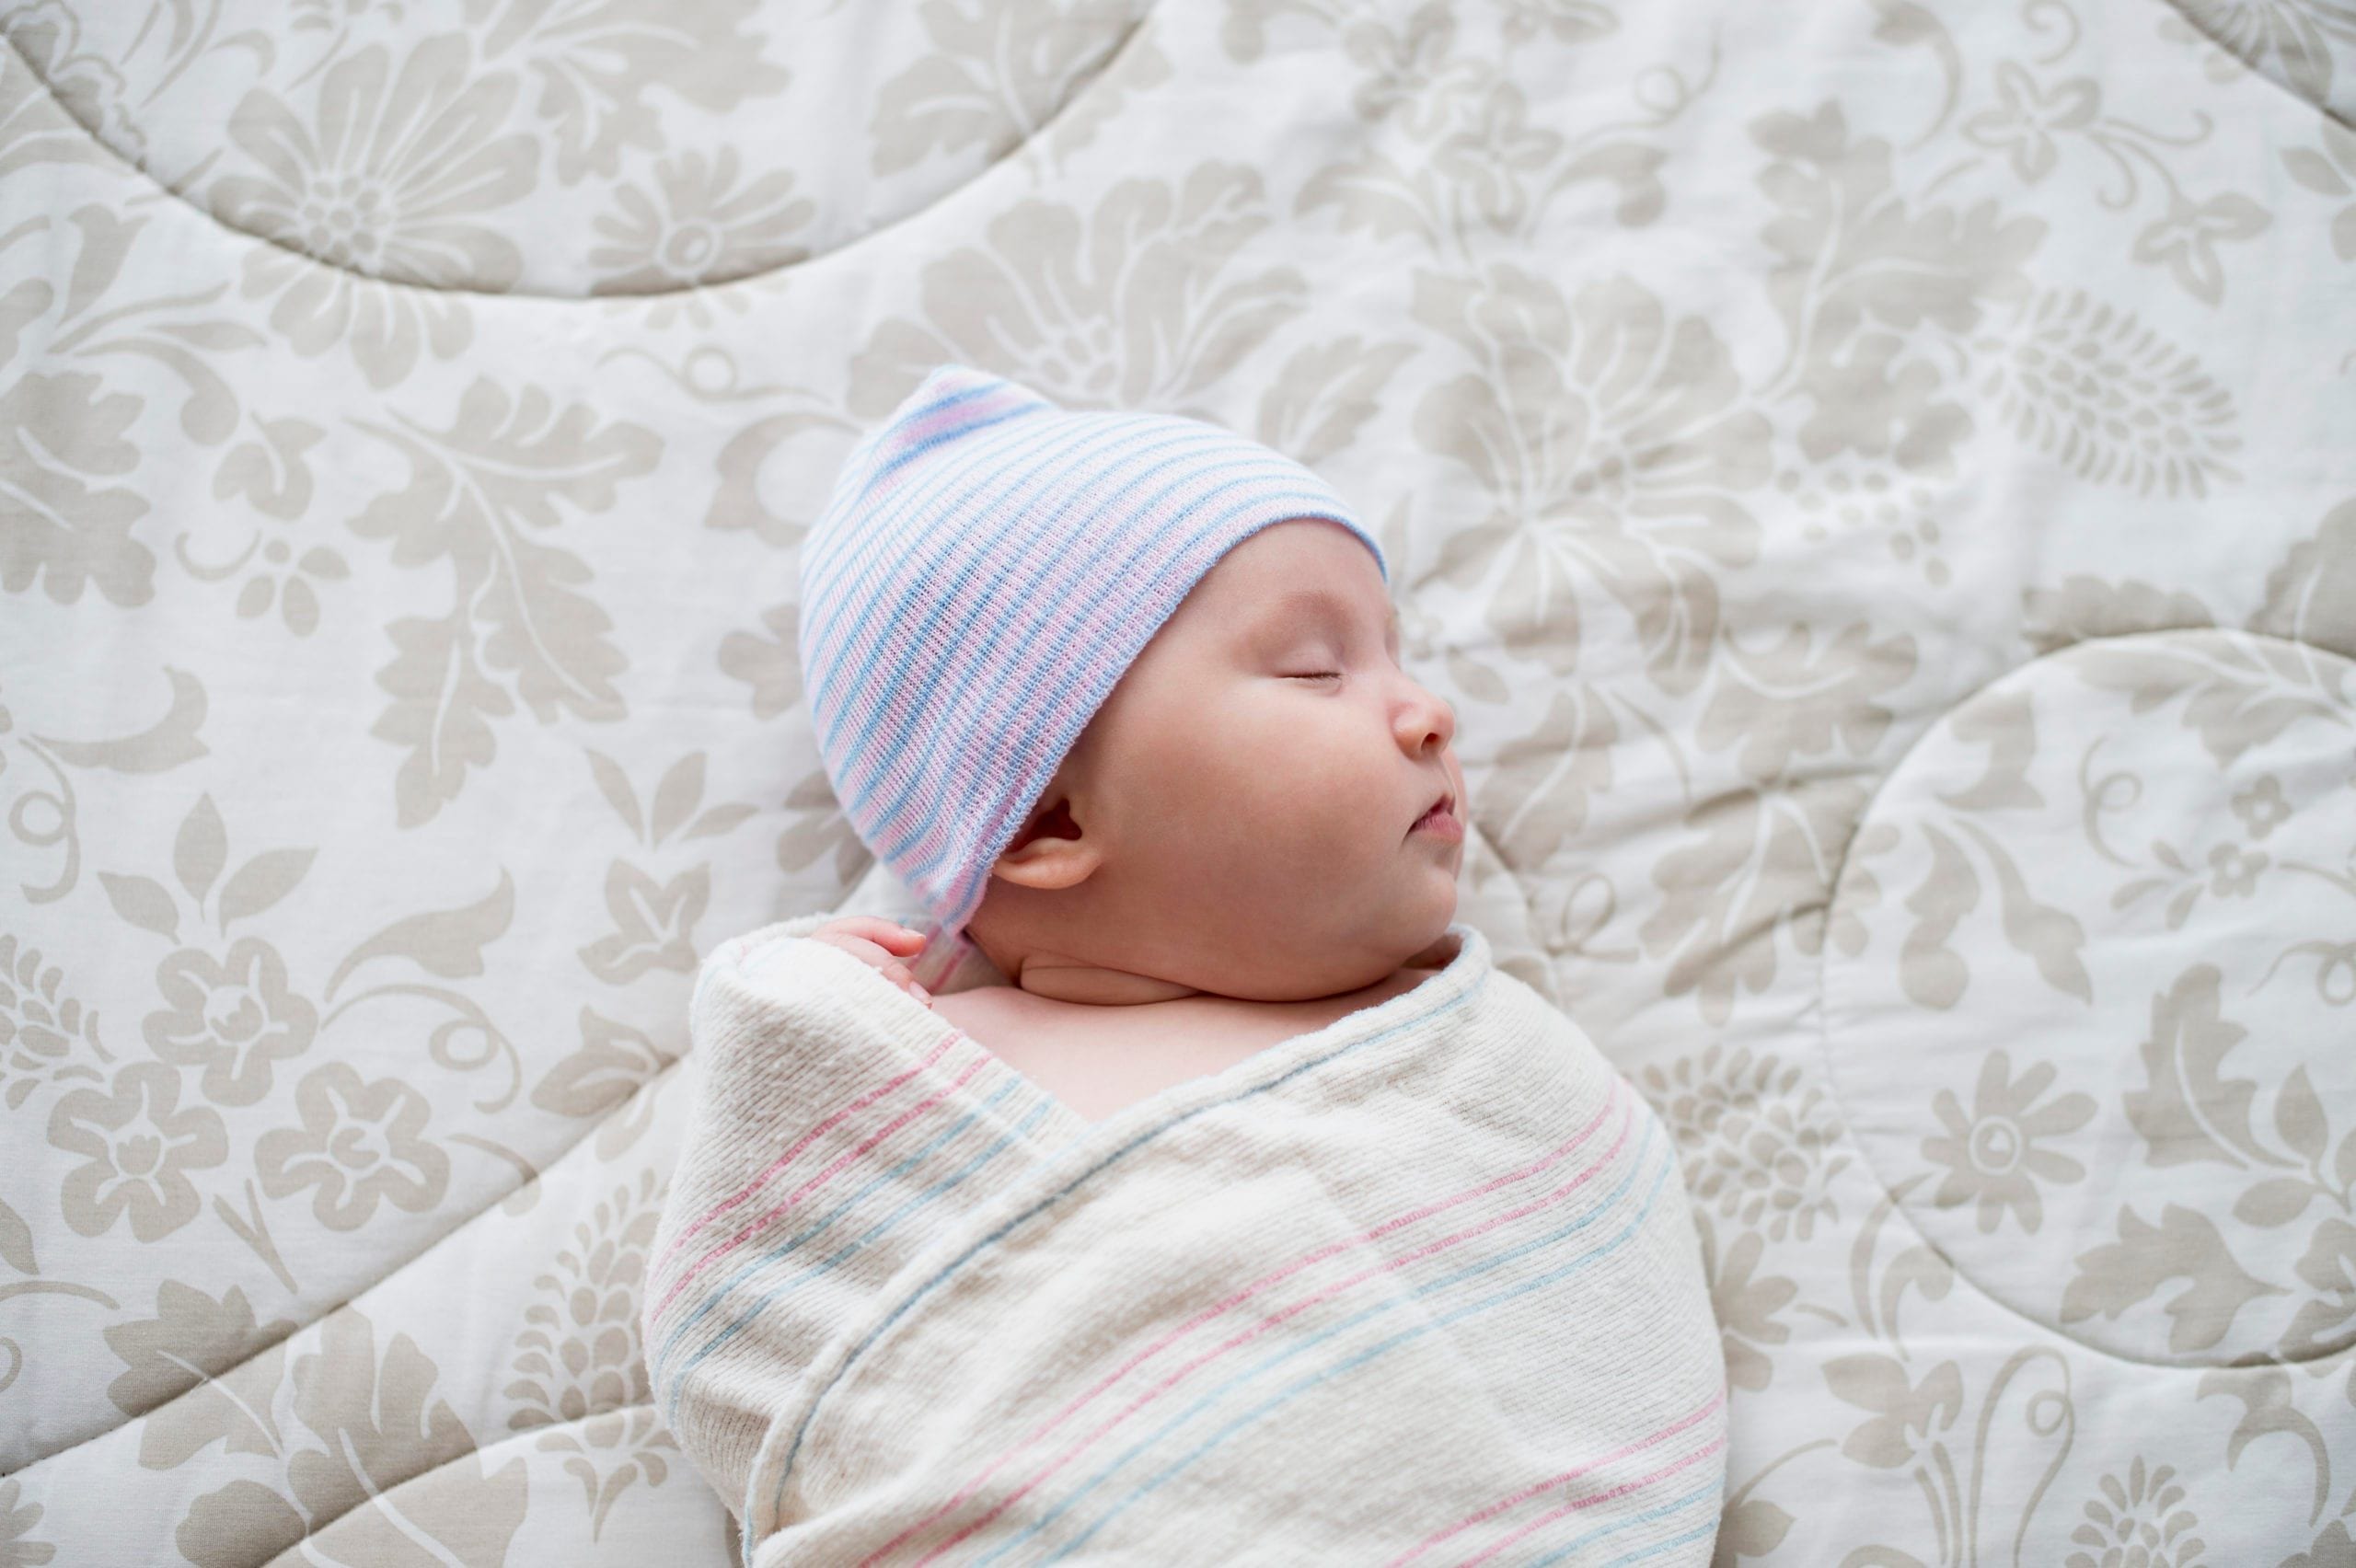 How to pick the right baby blanket size